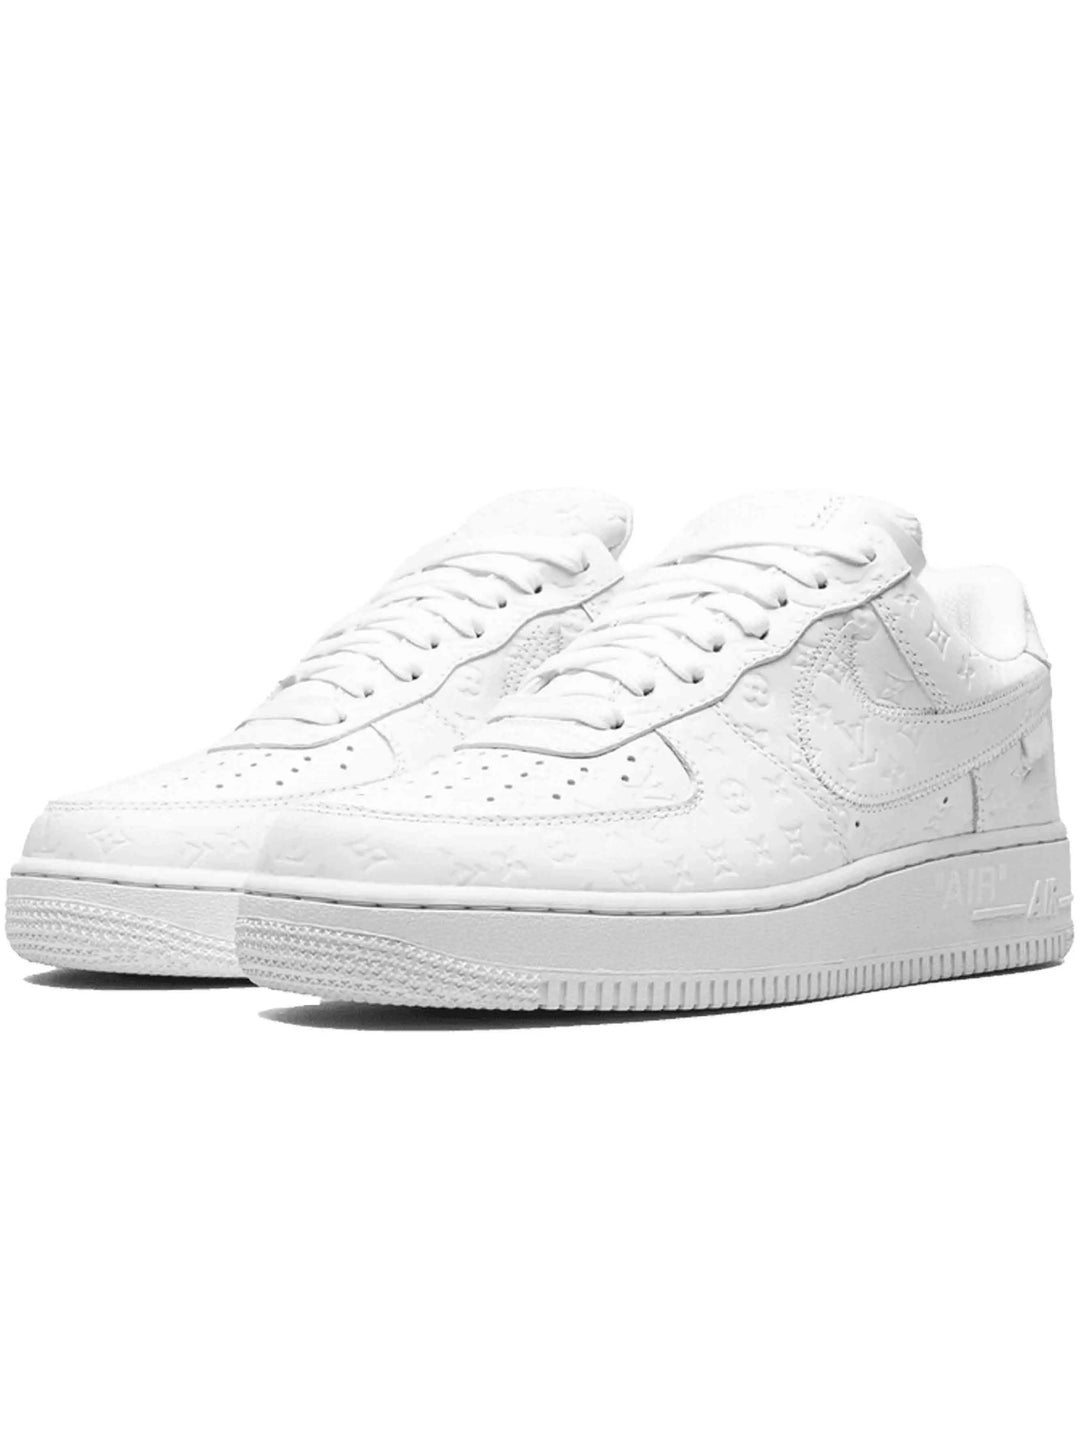 Louis Vuitton Nike Air Force 1 Low By Virgil Abloh White Prior